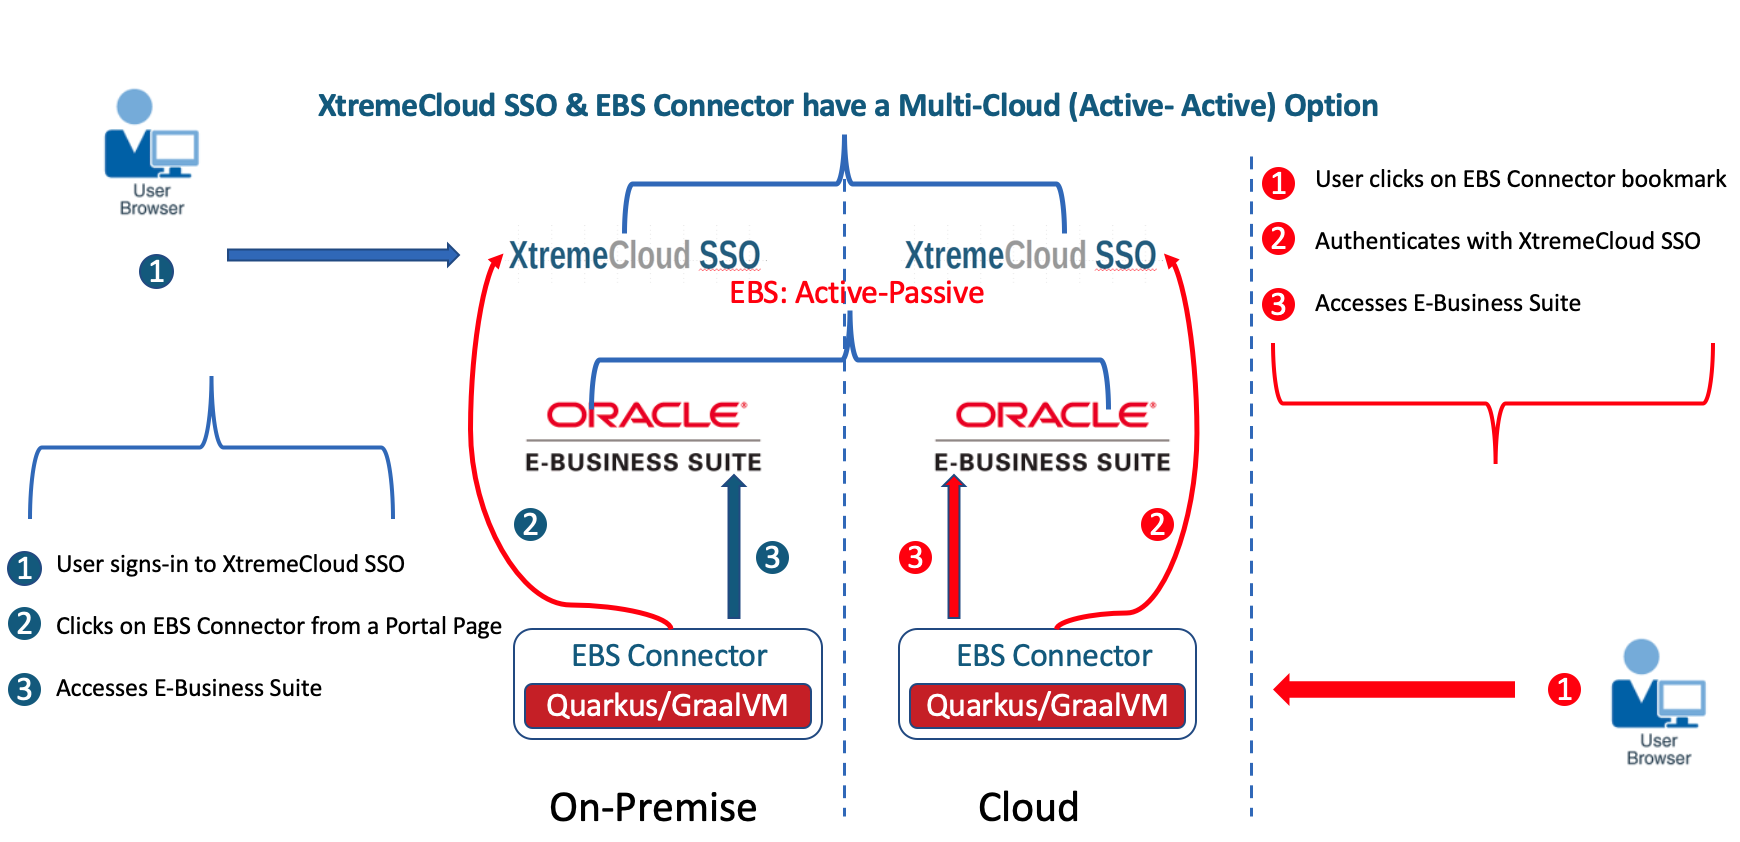 XtremeCloud SSO EBS Connector Deployments